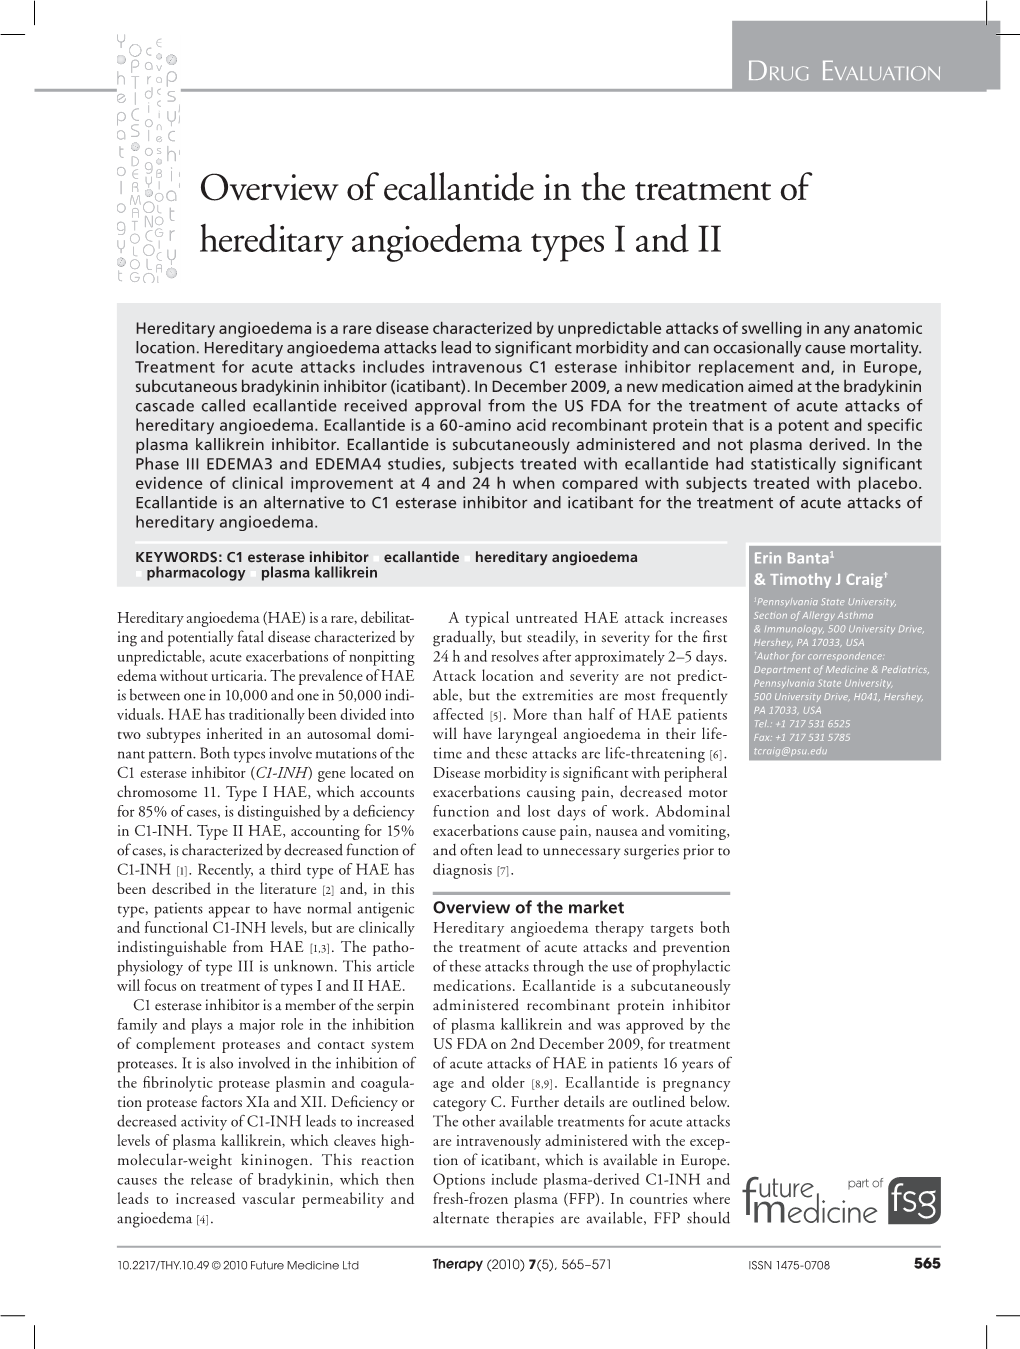 Overview of Ecallantide in the Treatment of Hereditary Angioedema Types I and II